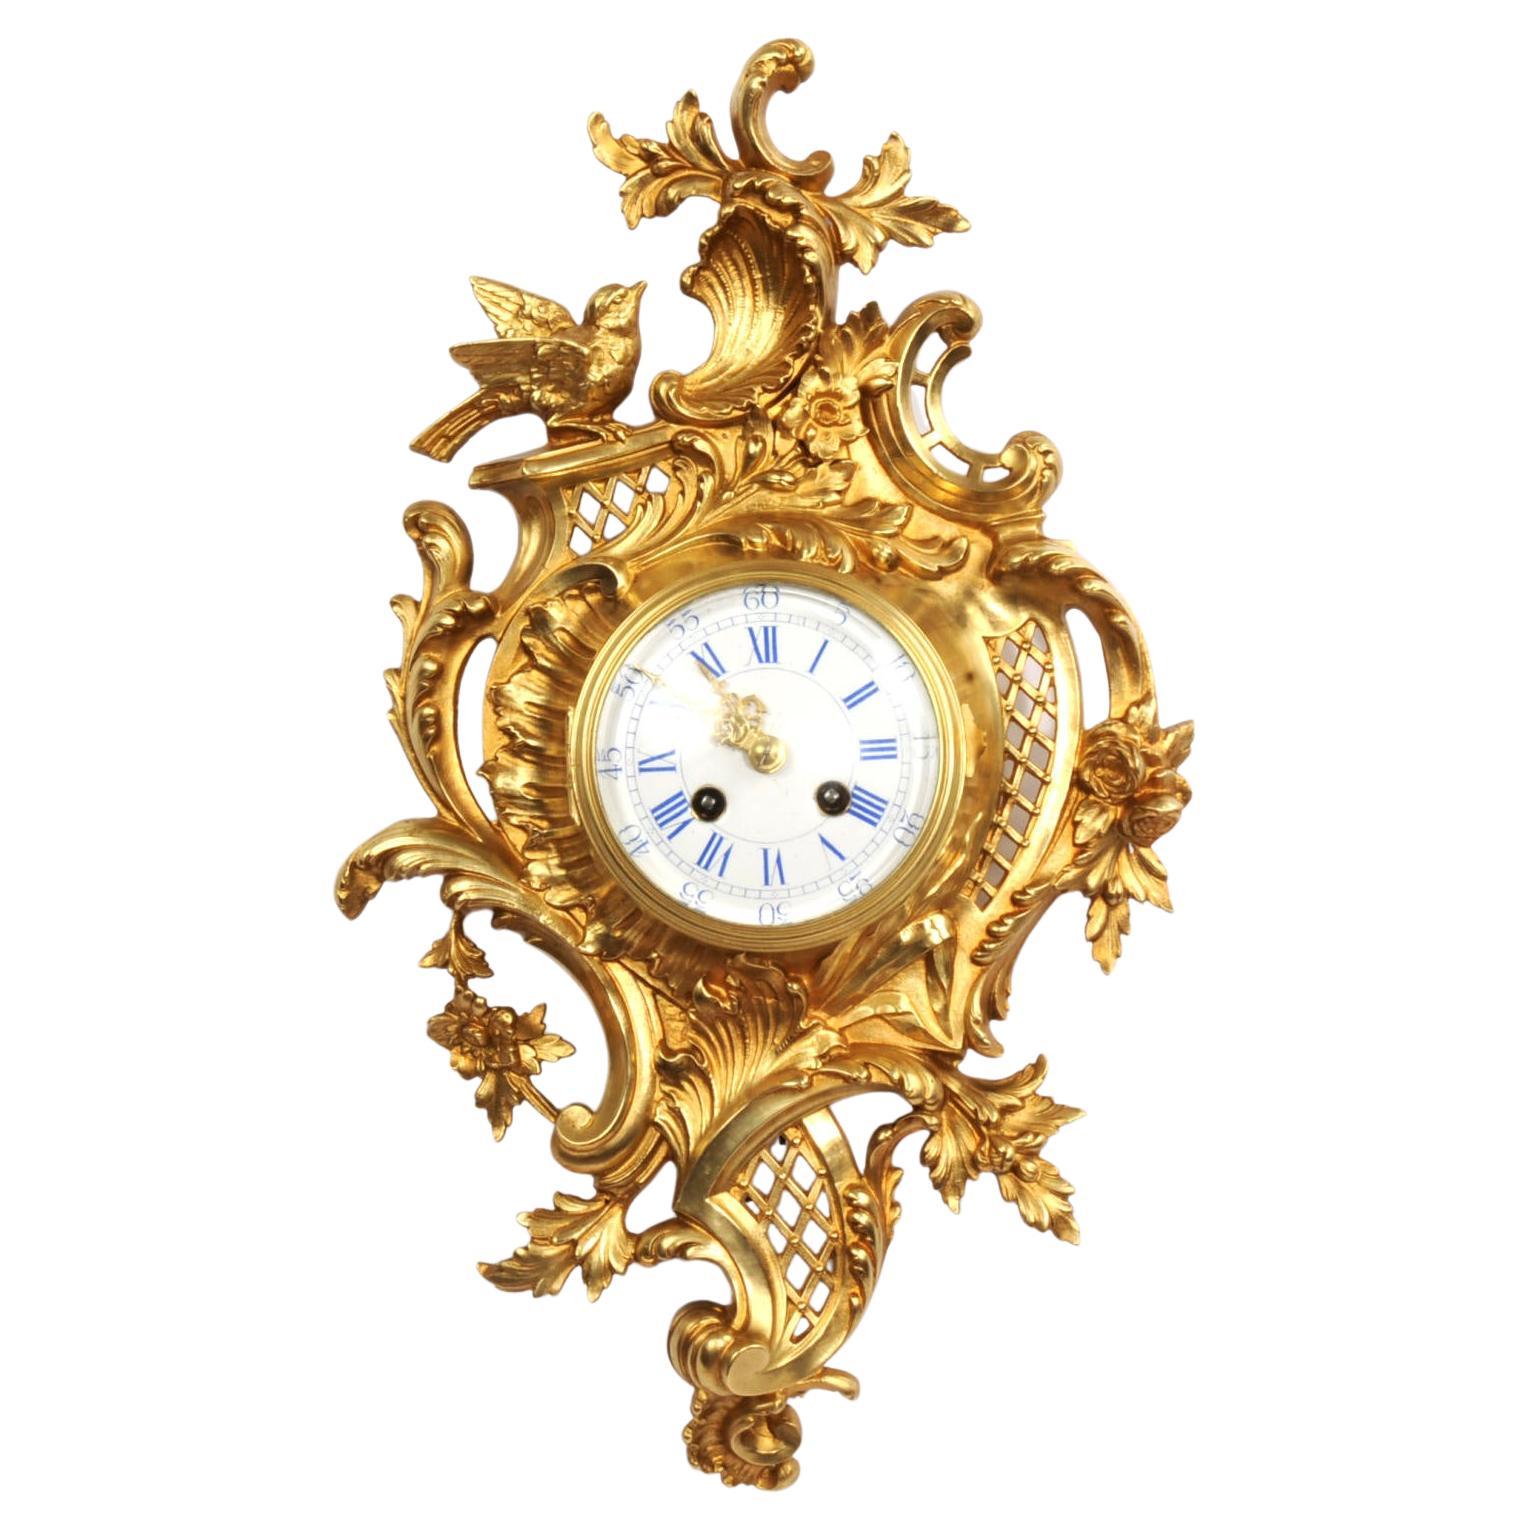 Antique French Gilt Bronze Rococo Cartel Wall Clock by Japy Freres